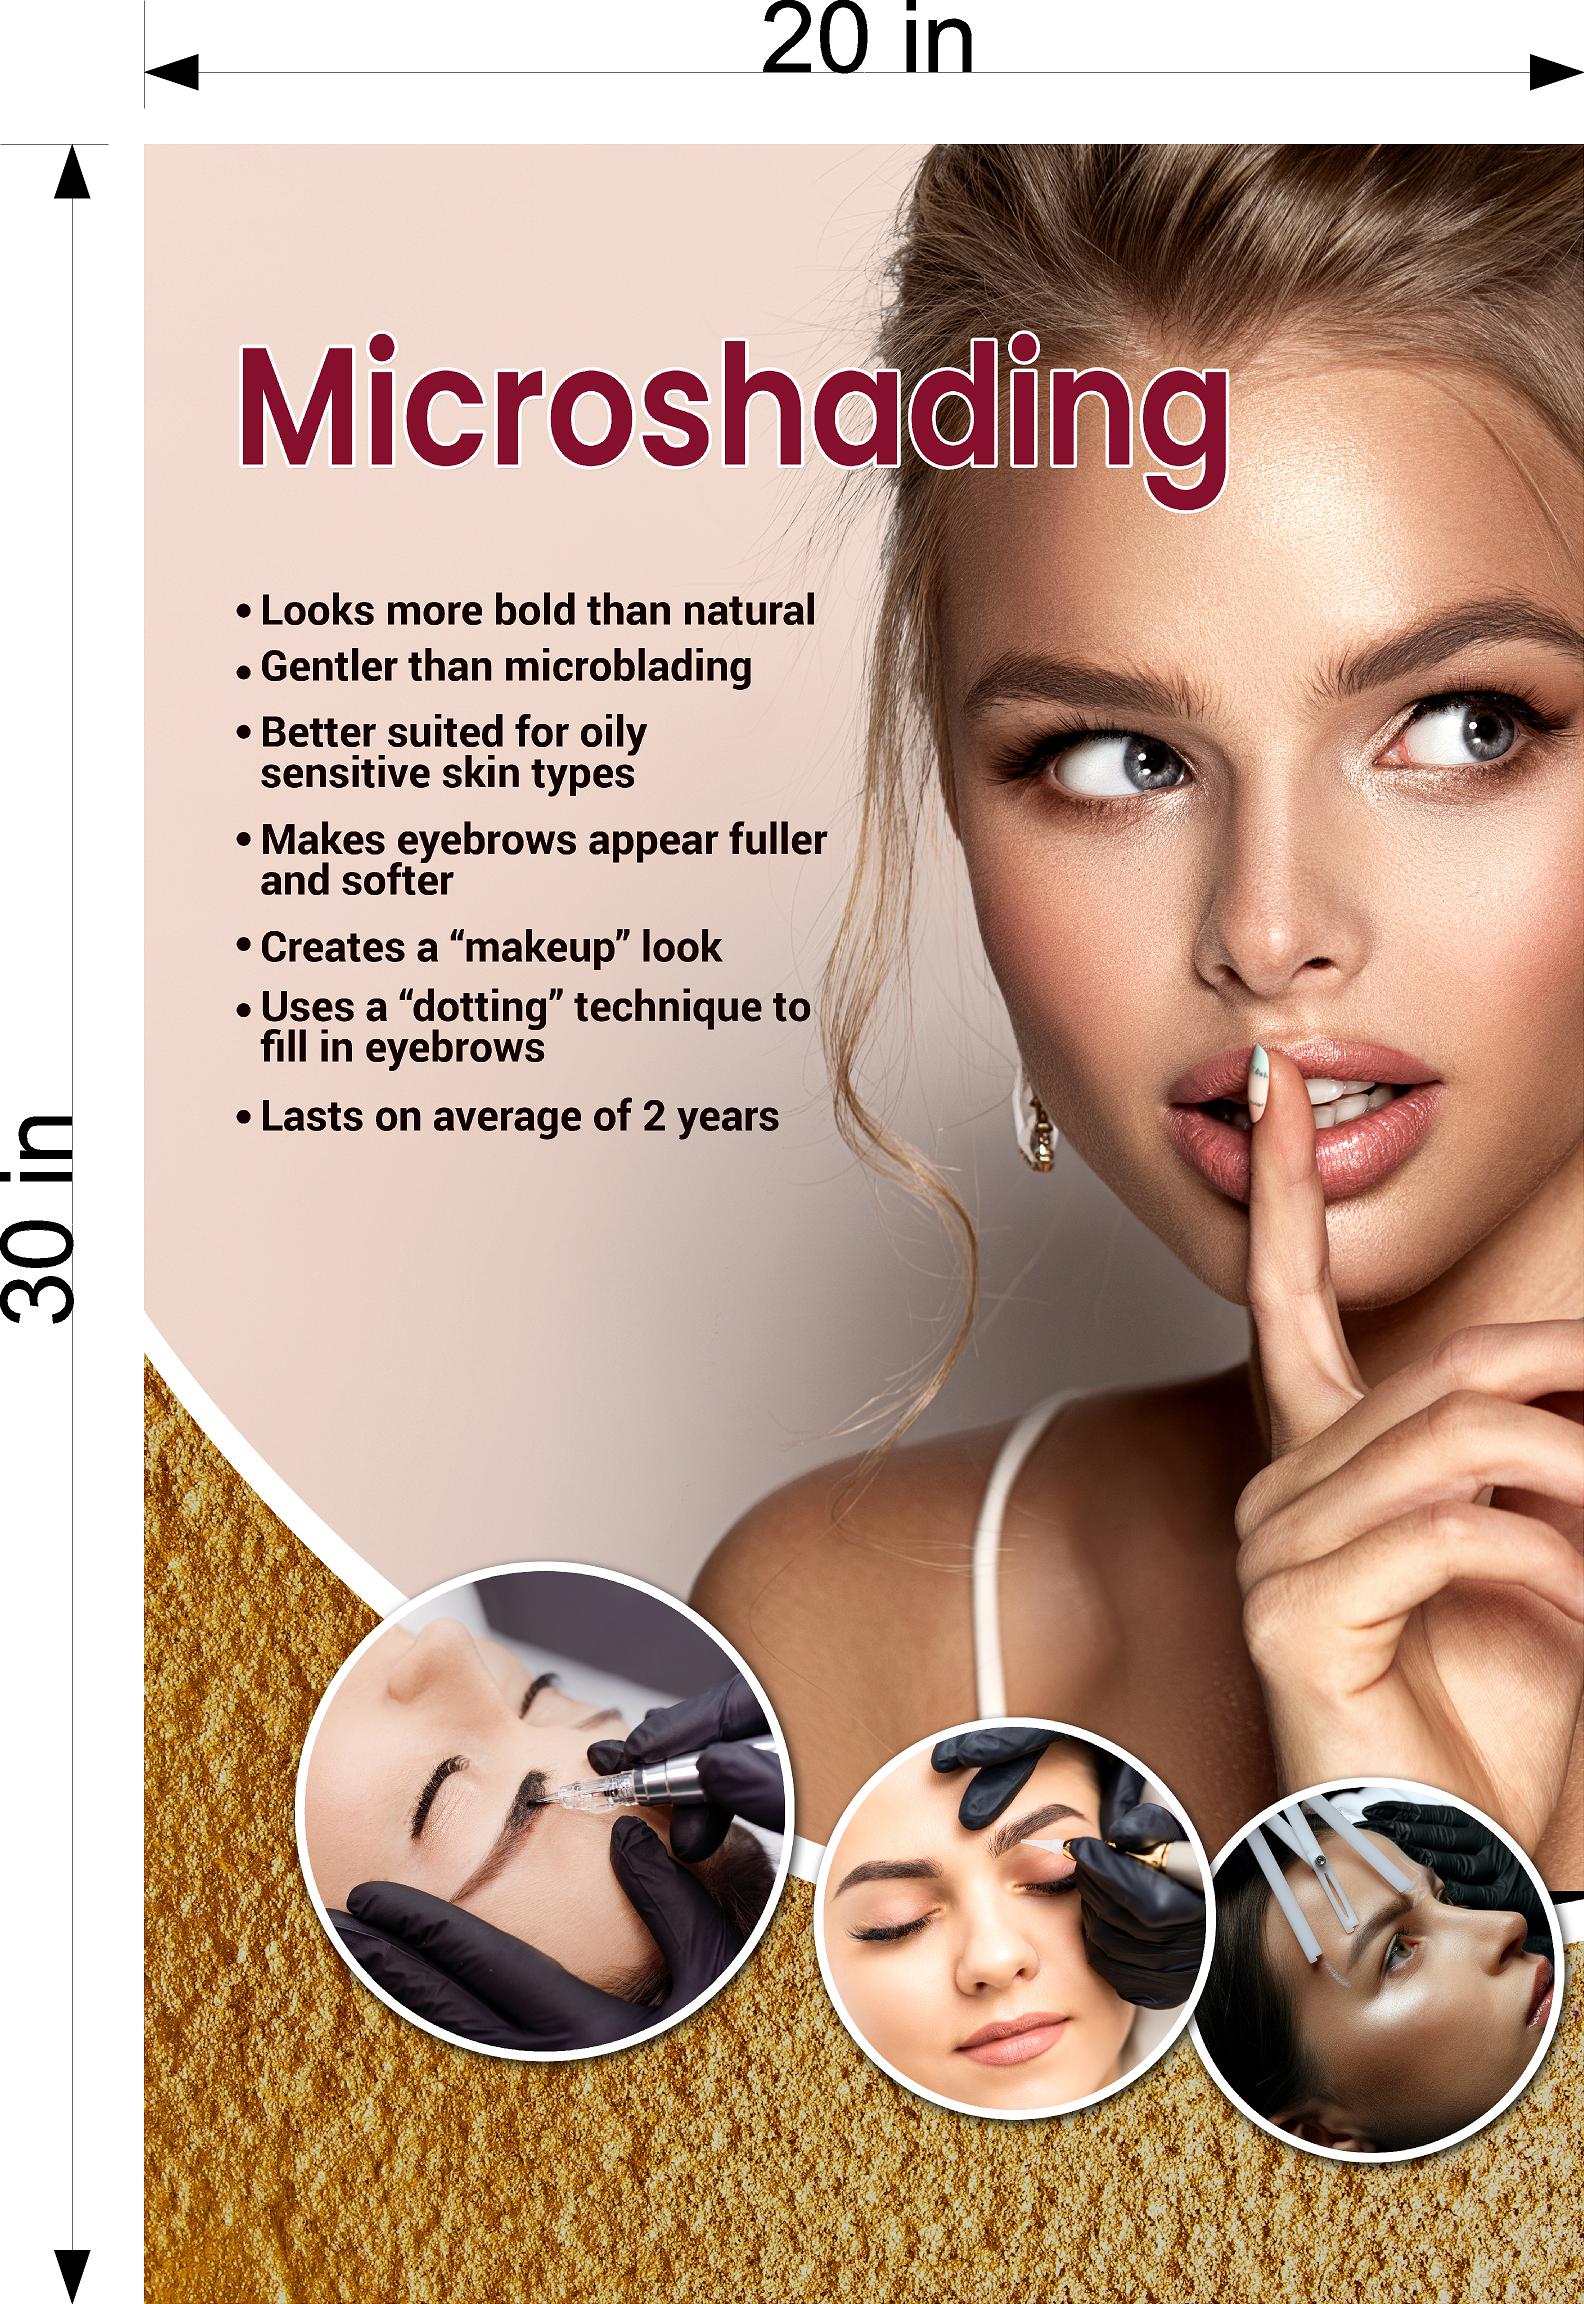 Microshading 05 Perforated Mesh One Way Vision See-Through Window Vinyl Salon Services Makeup Vertical